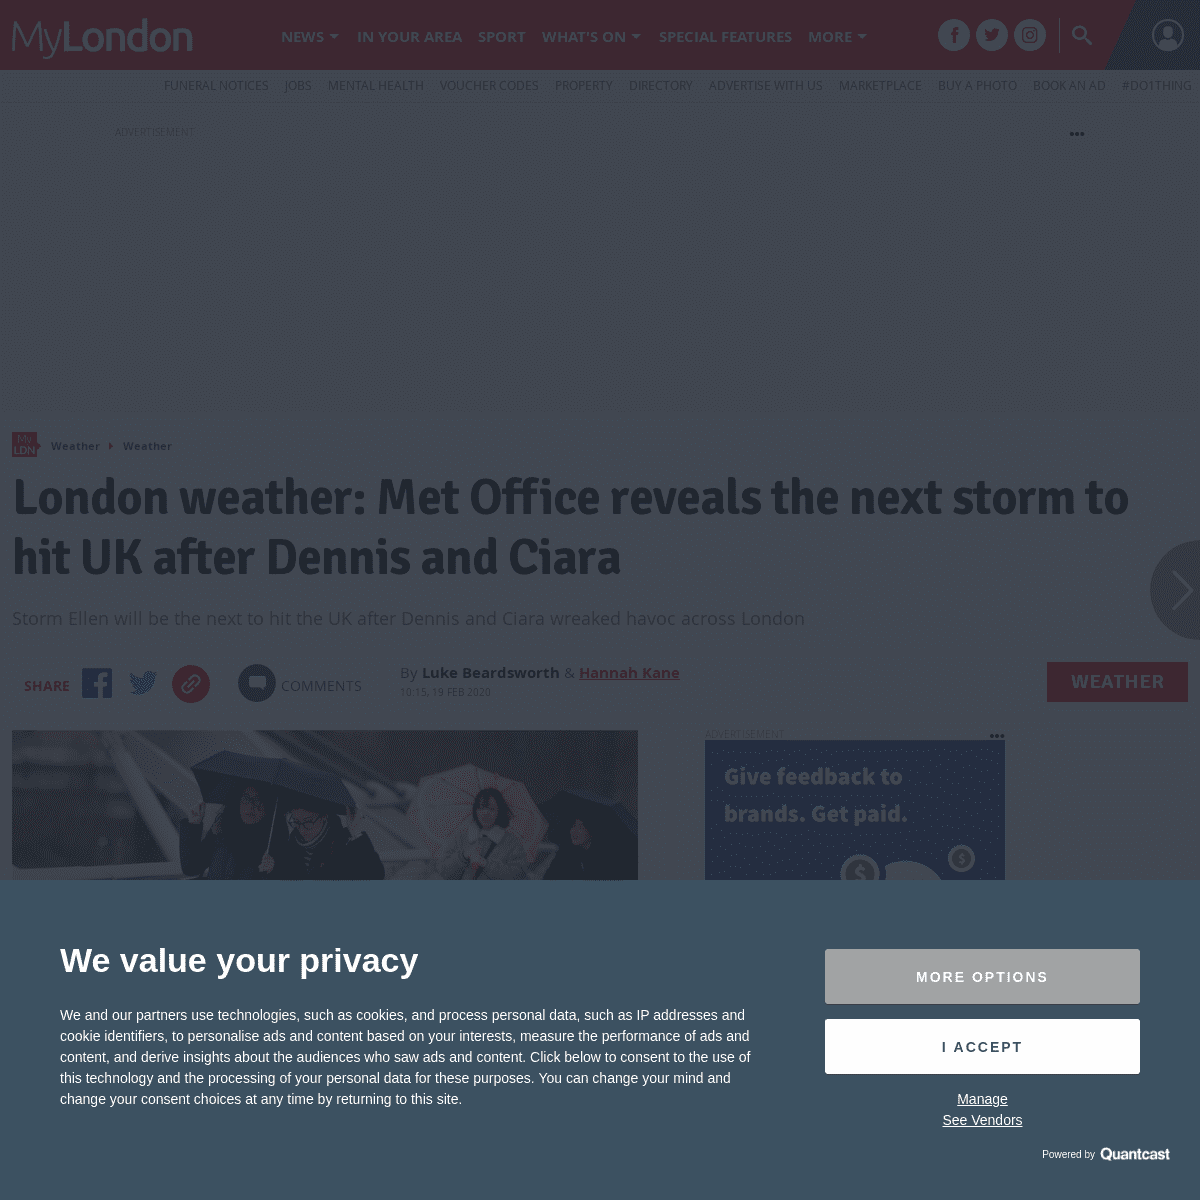 A complete backup of www.mylondon.news/weather/london-weather-met-office-reveals-17774316